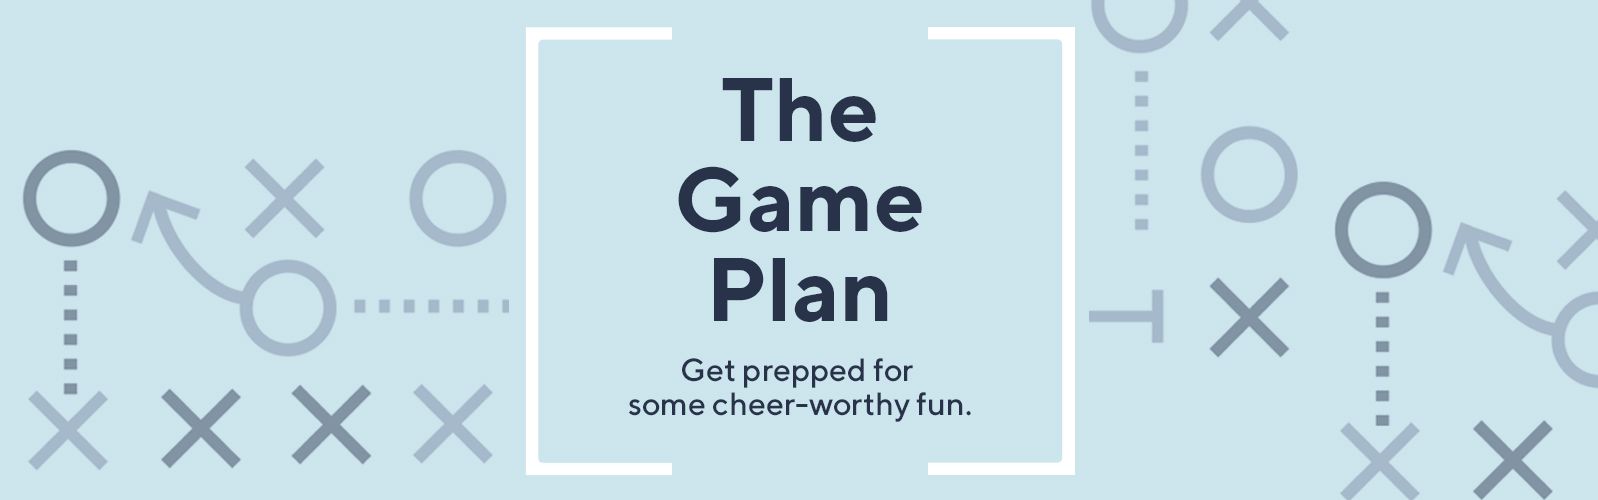 The Game Plan.  Get prepped for some cheer-worthy fun.